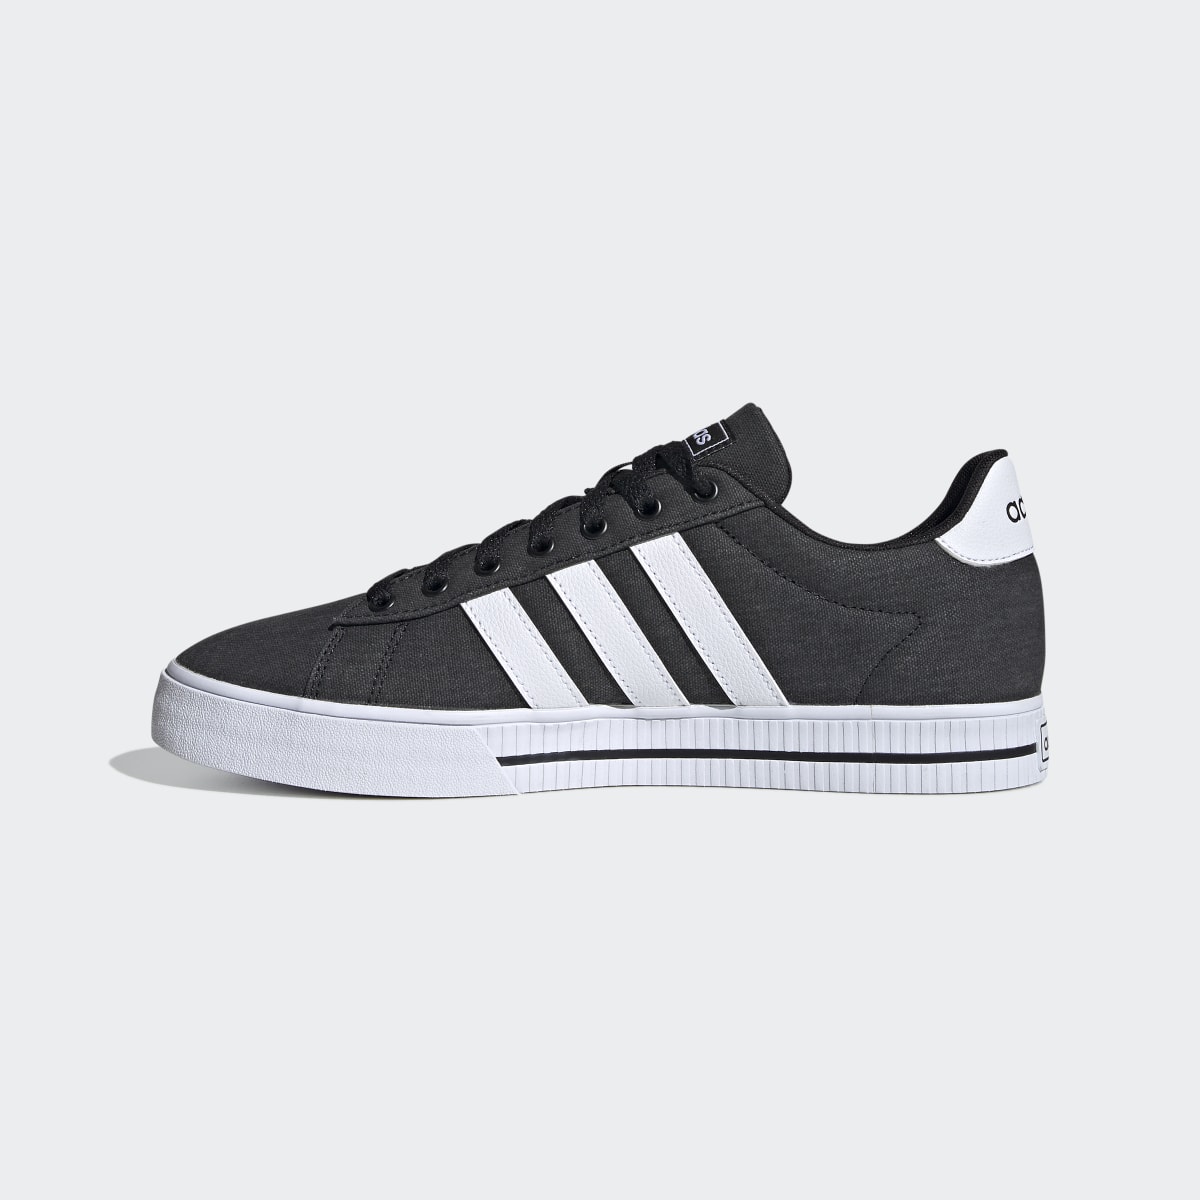 Adidas Daily 3.0 Shoes. 8